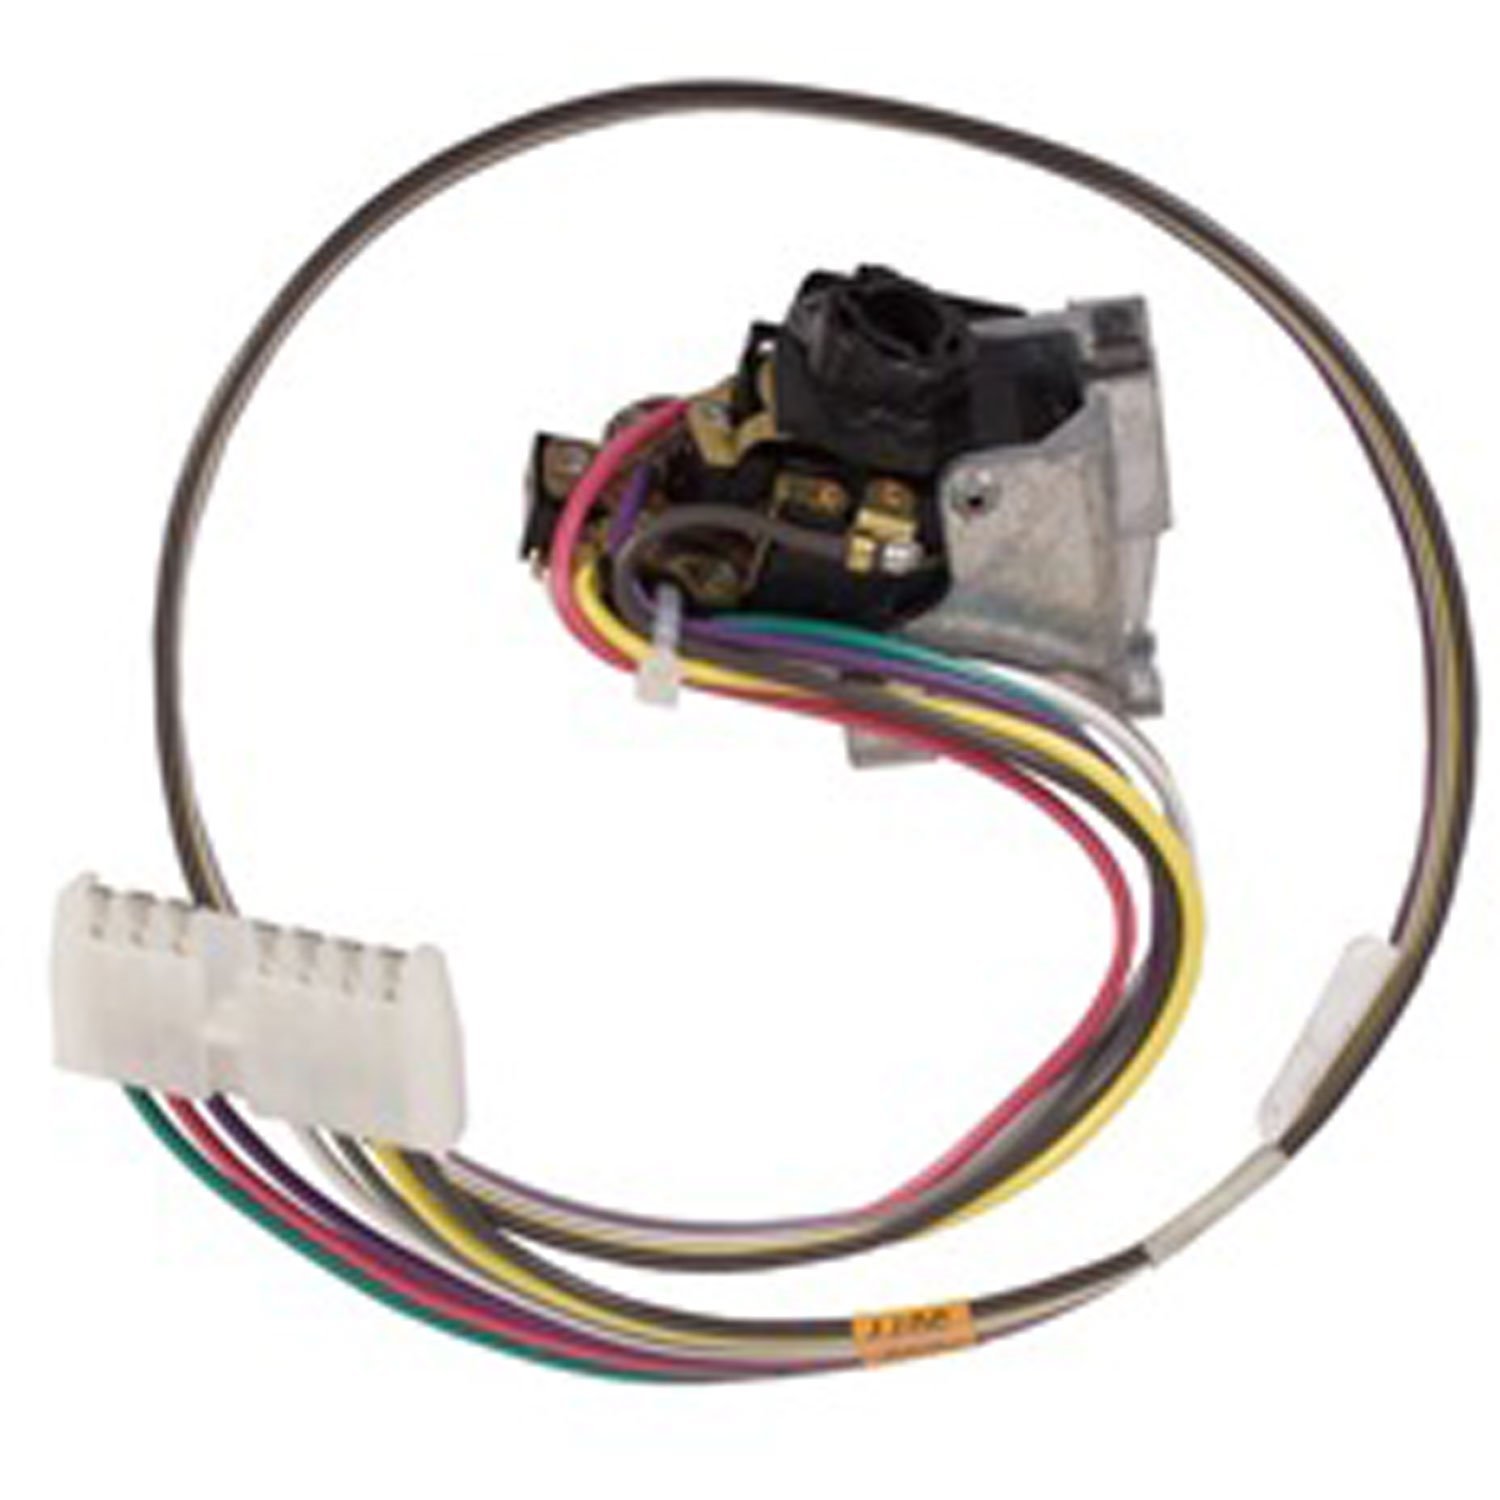 This wiper switch fits 84-94 Jeep Cherokees 86-91 SJ Cherokees & Grand Wagoneers 87-95 Wranglers wit